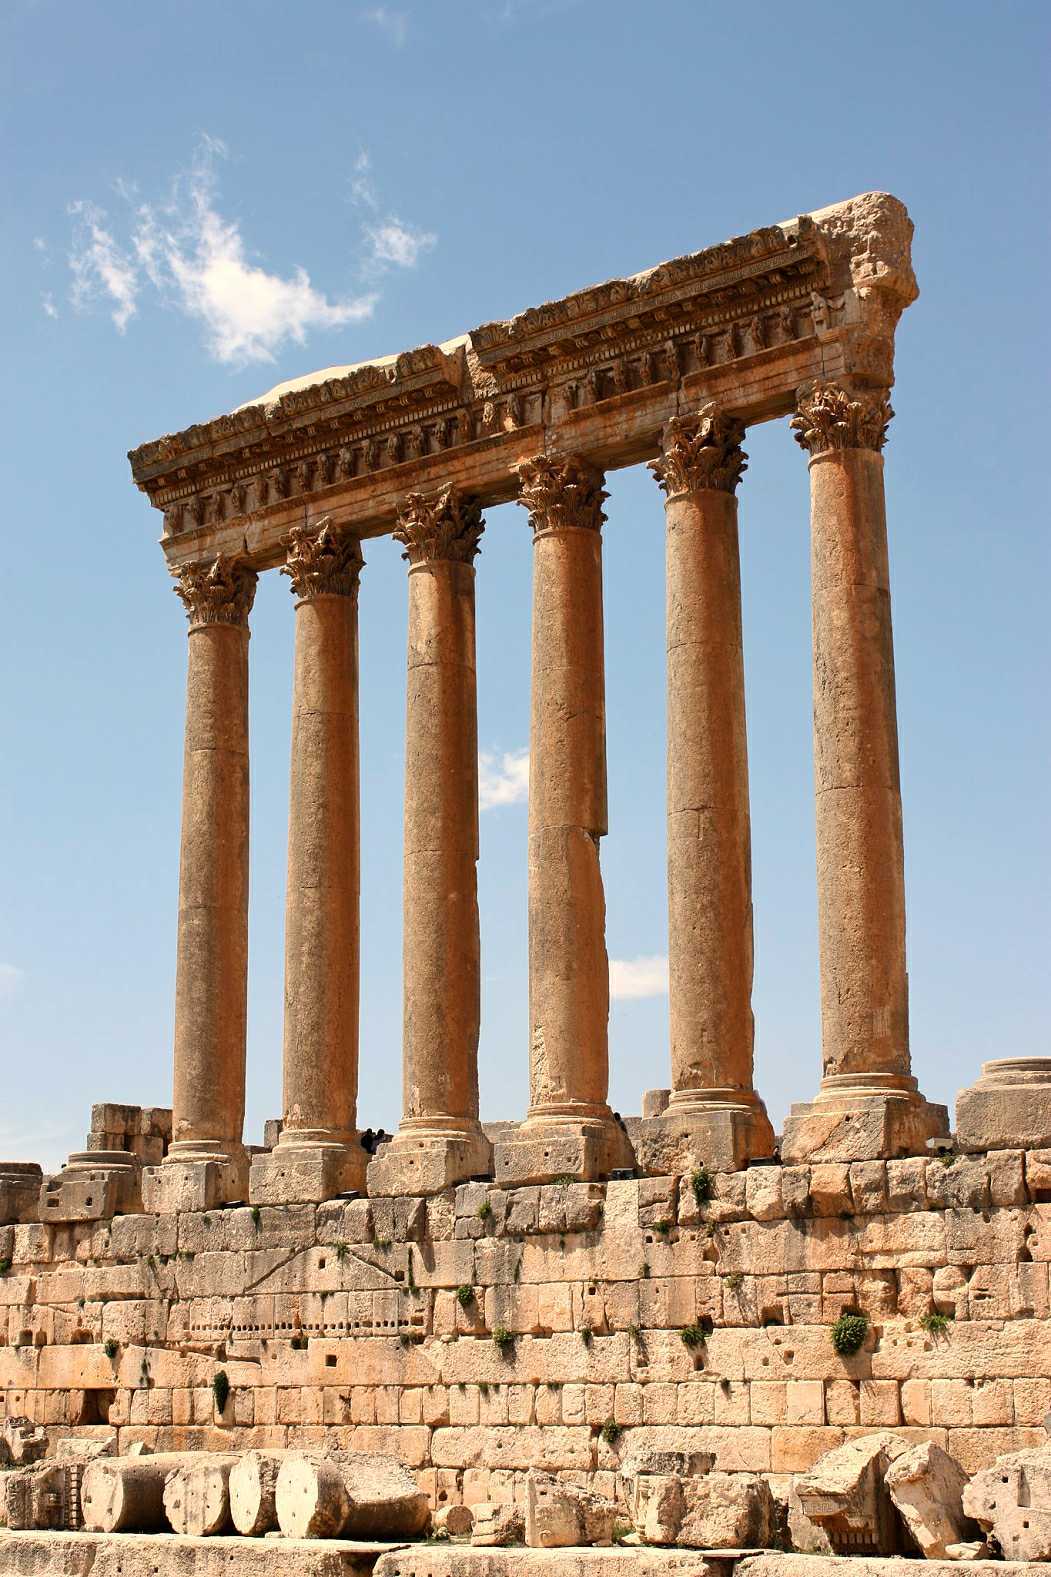 The temple of Jupiter in Baalbek temple complex, in Lebanon